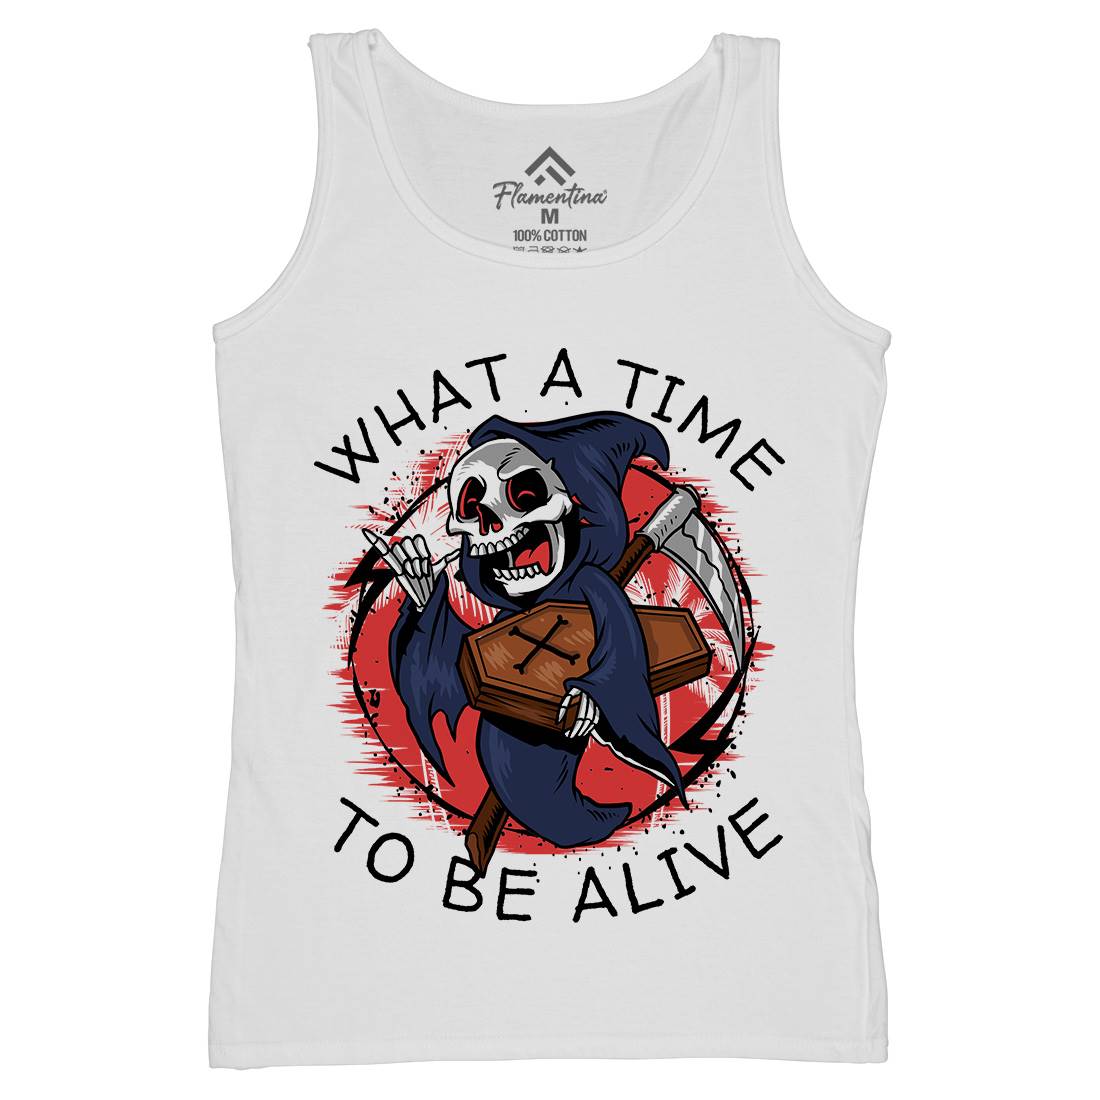 What A Time To Be Alive Womens Organic Tank Top Vest Funny D096